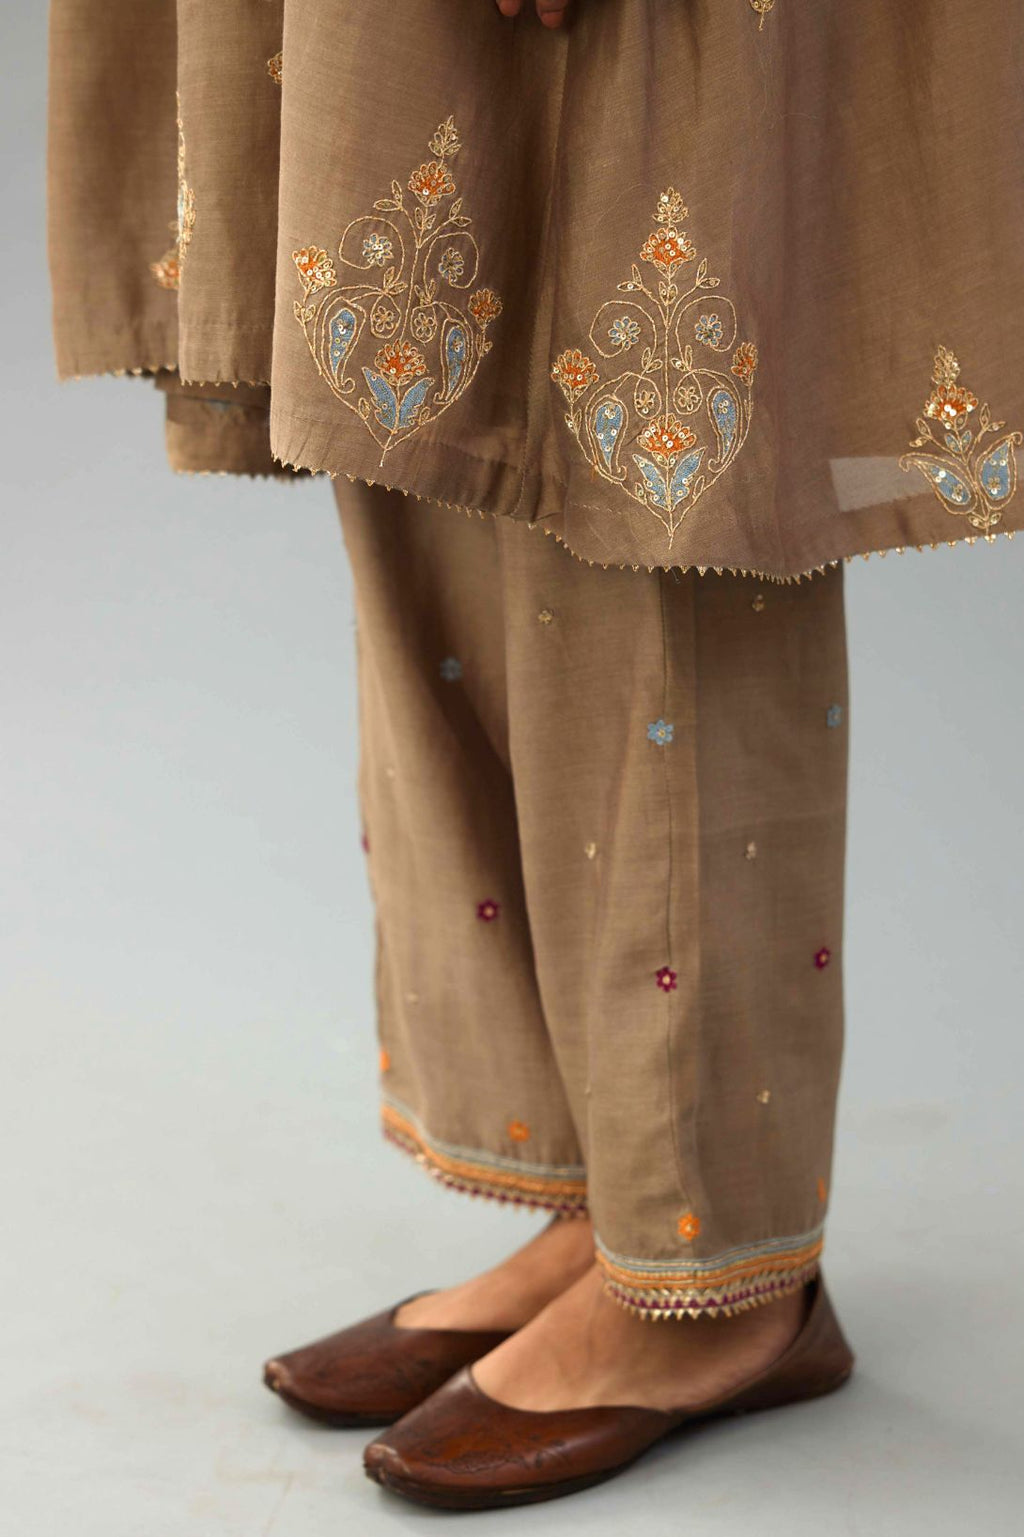 Taupe Silk Chanderi short kurta set with collar and front placket, detailed with delicate gold embroidery is done around the placket and collar.